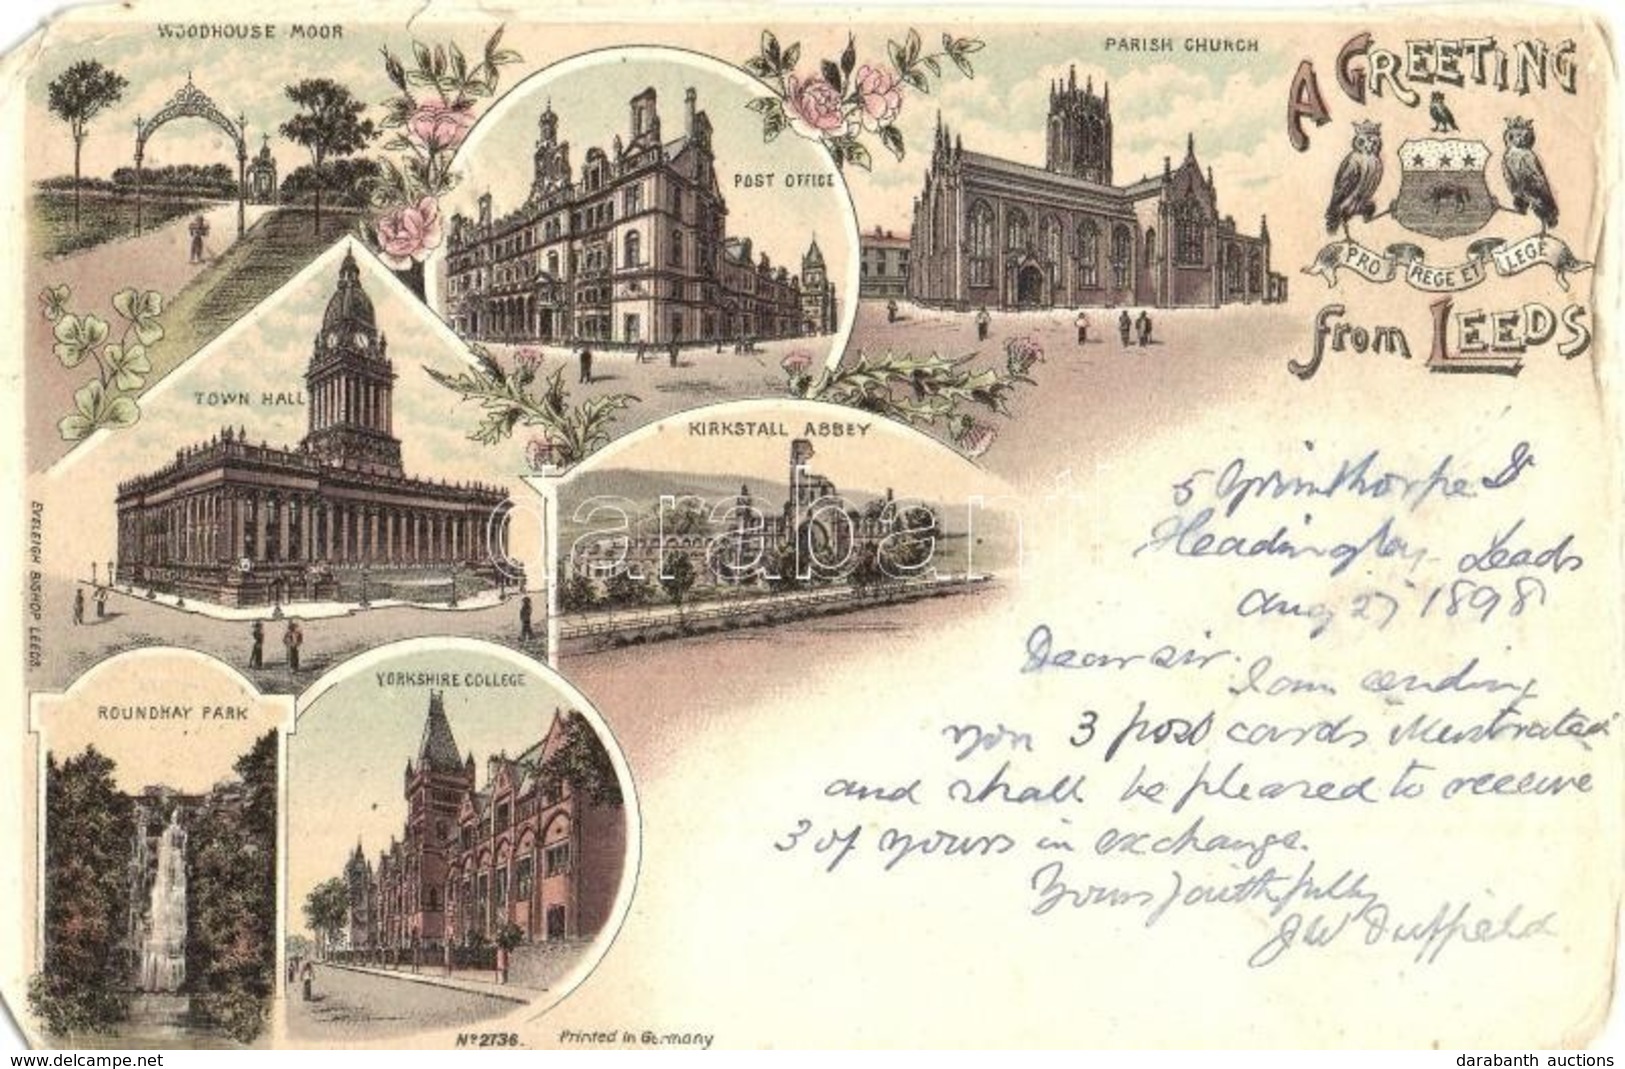 T4 1898 Leeds, Woodhouse Moor, Post Office, Parish Church, Kirkstall Abbey, Town Hall, Yorkshire College, Roundhay Park. - Unclassified